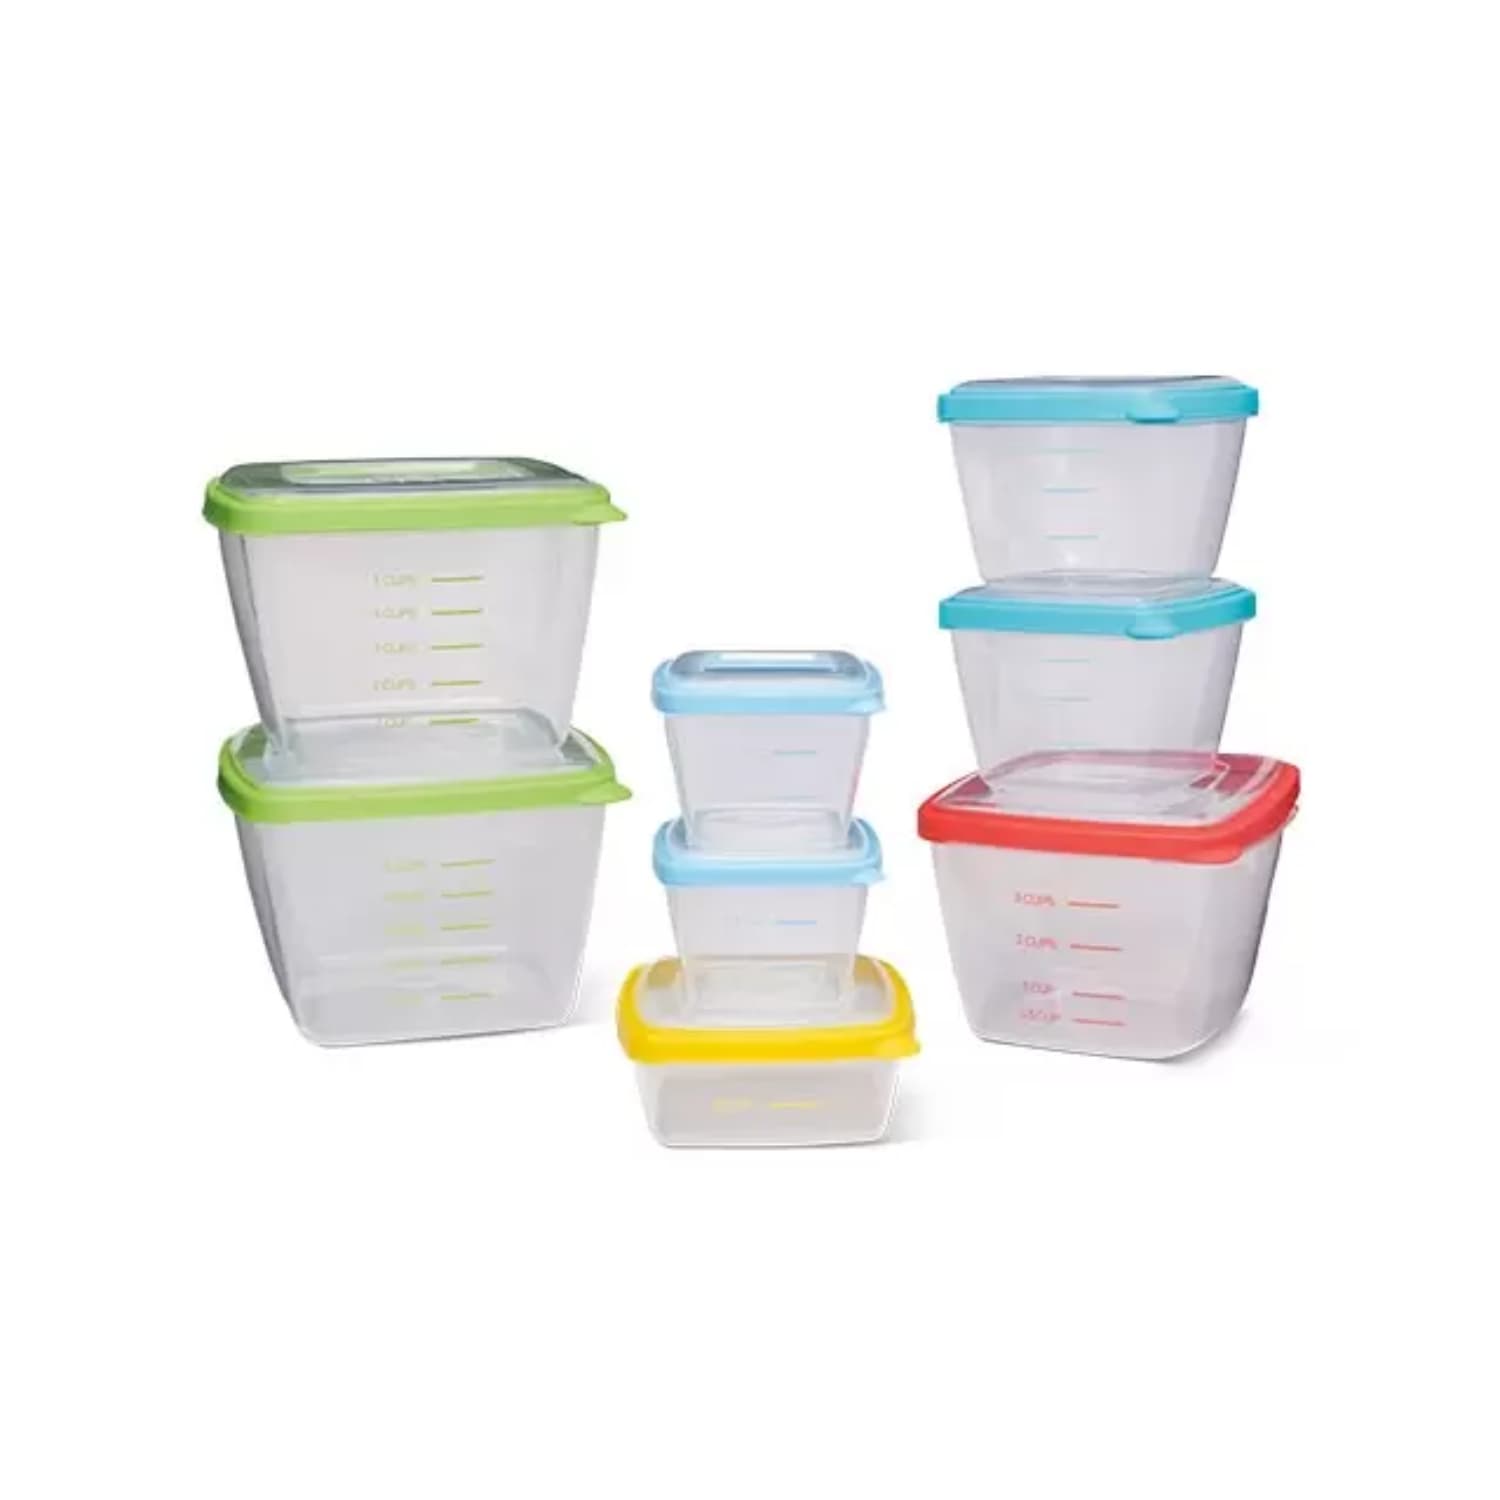 Aldi Is Selling an $8 “Durable” 16-Piece Food Storage Set